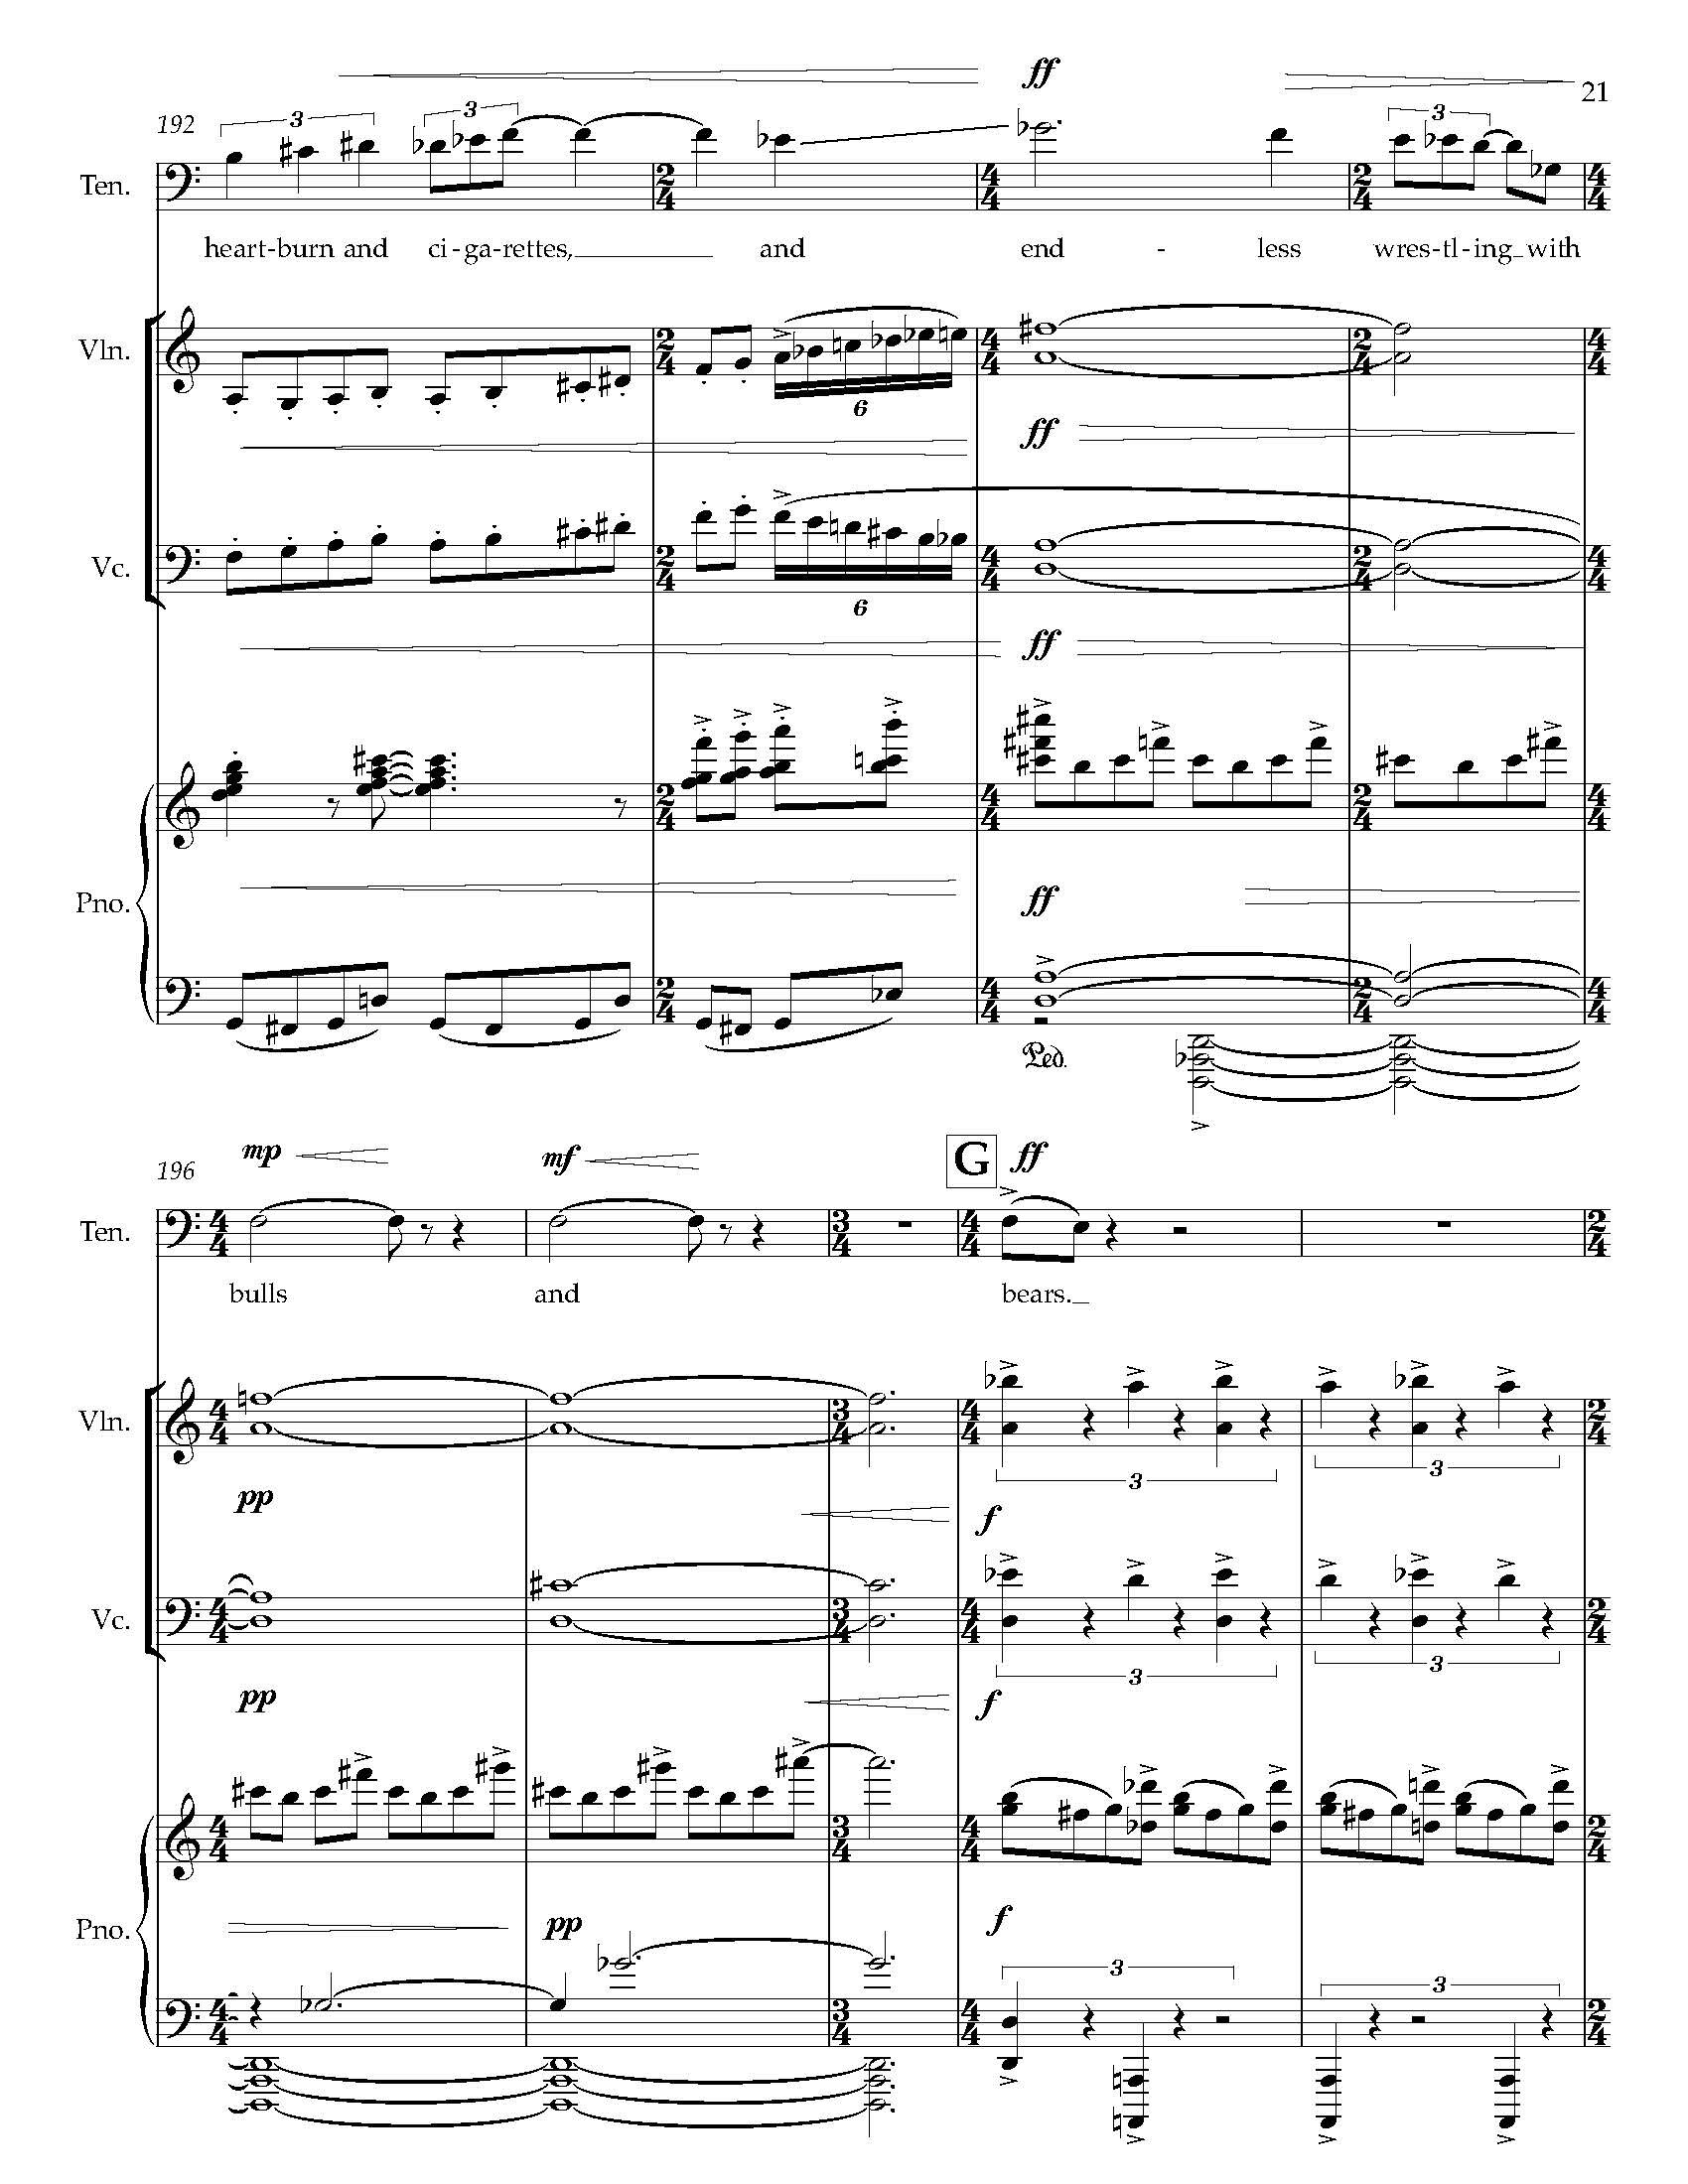 Gursky Songs - Complete Score_Page_29.jpg